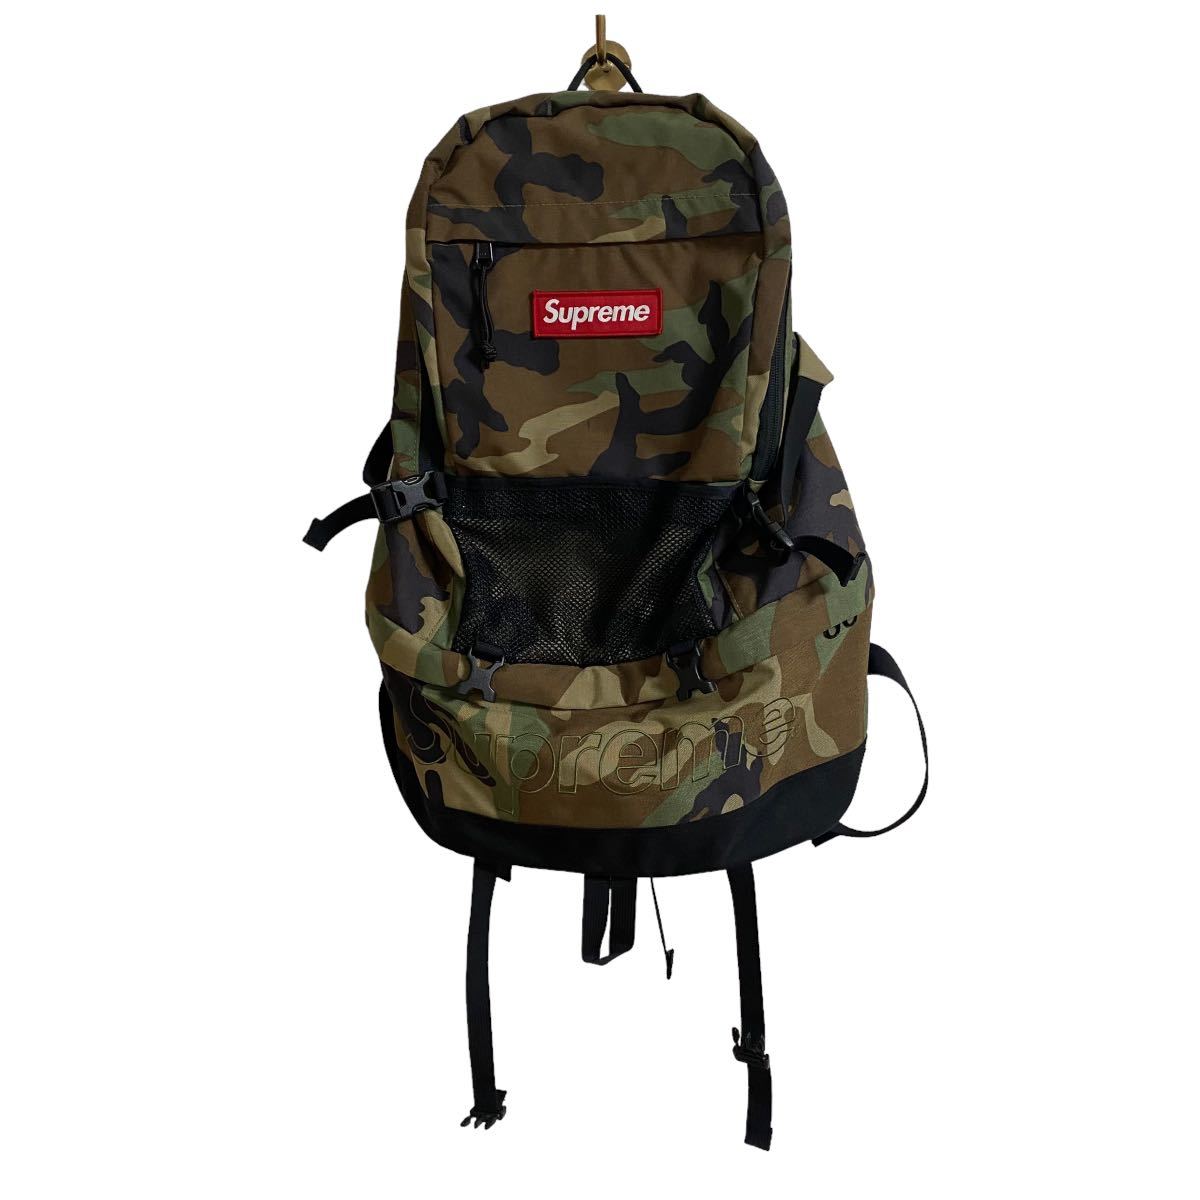 Supreme 2015AW backpack バックパック リュック 迷彩 camo